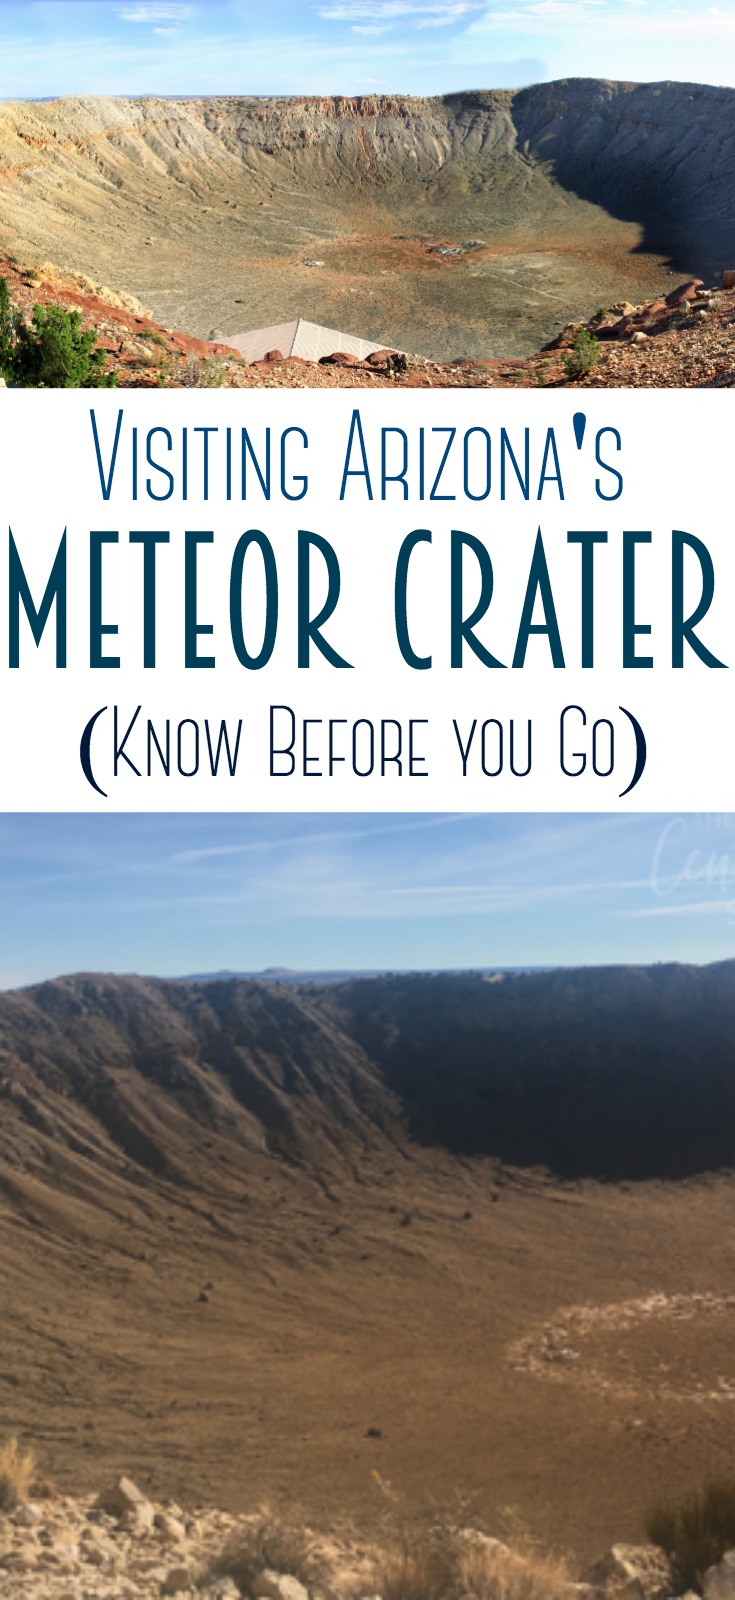 The Arizona Meteor Crater is the world’s best preserved meteorite impact site on Earth, located off I-40 and Route 66 in Northern Arizona near Winslow.